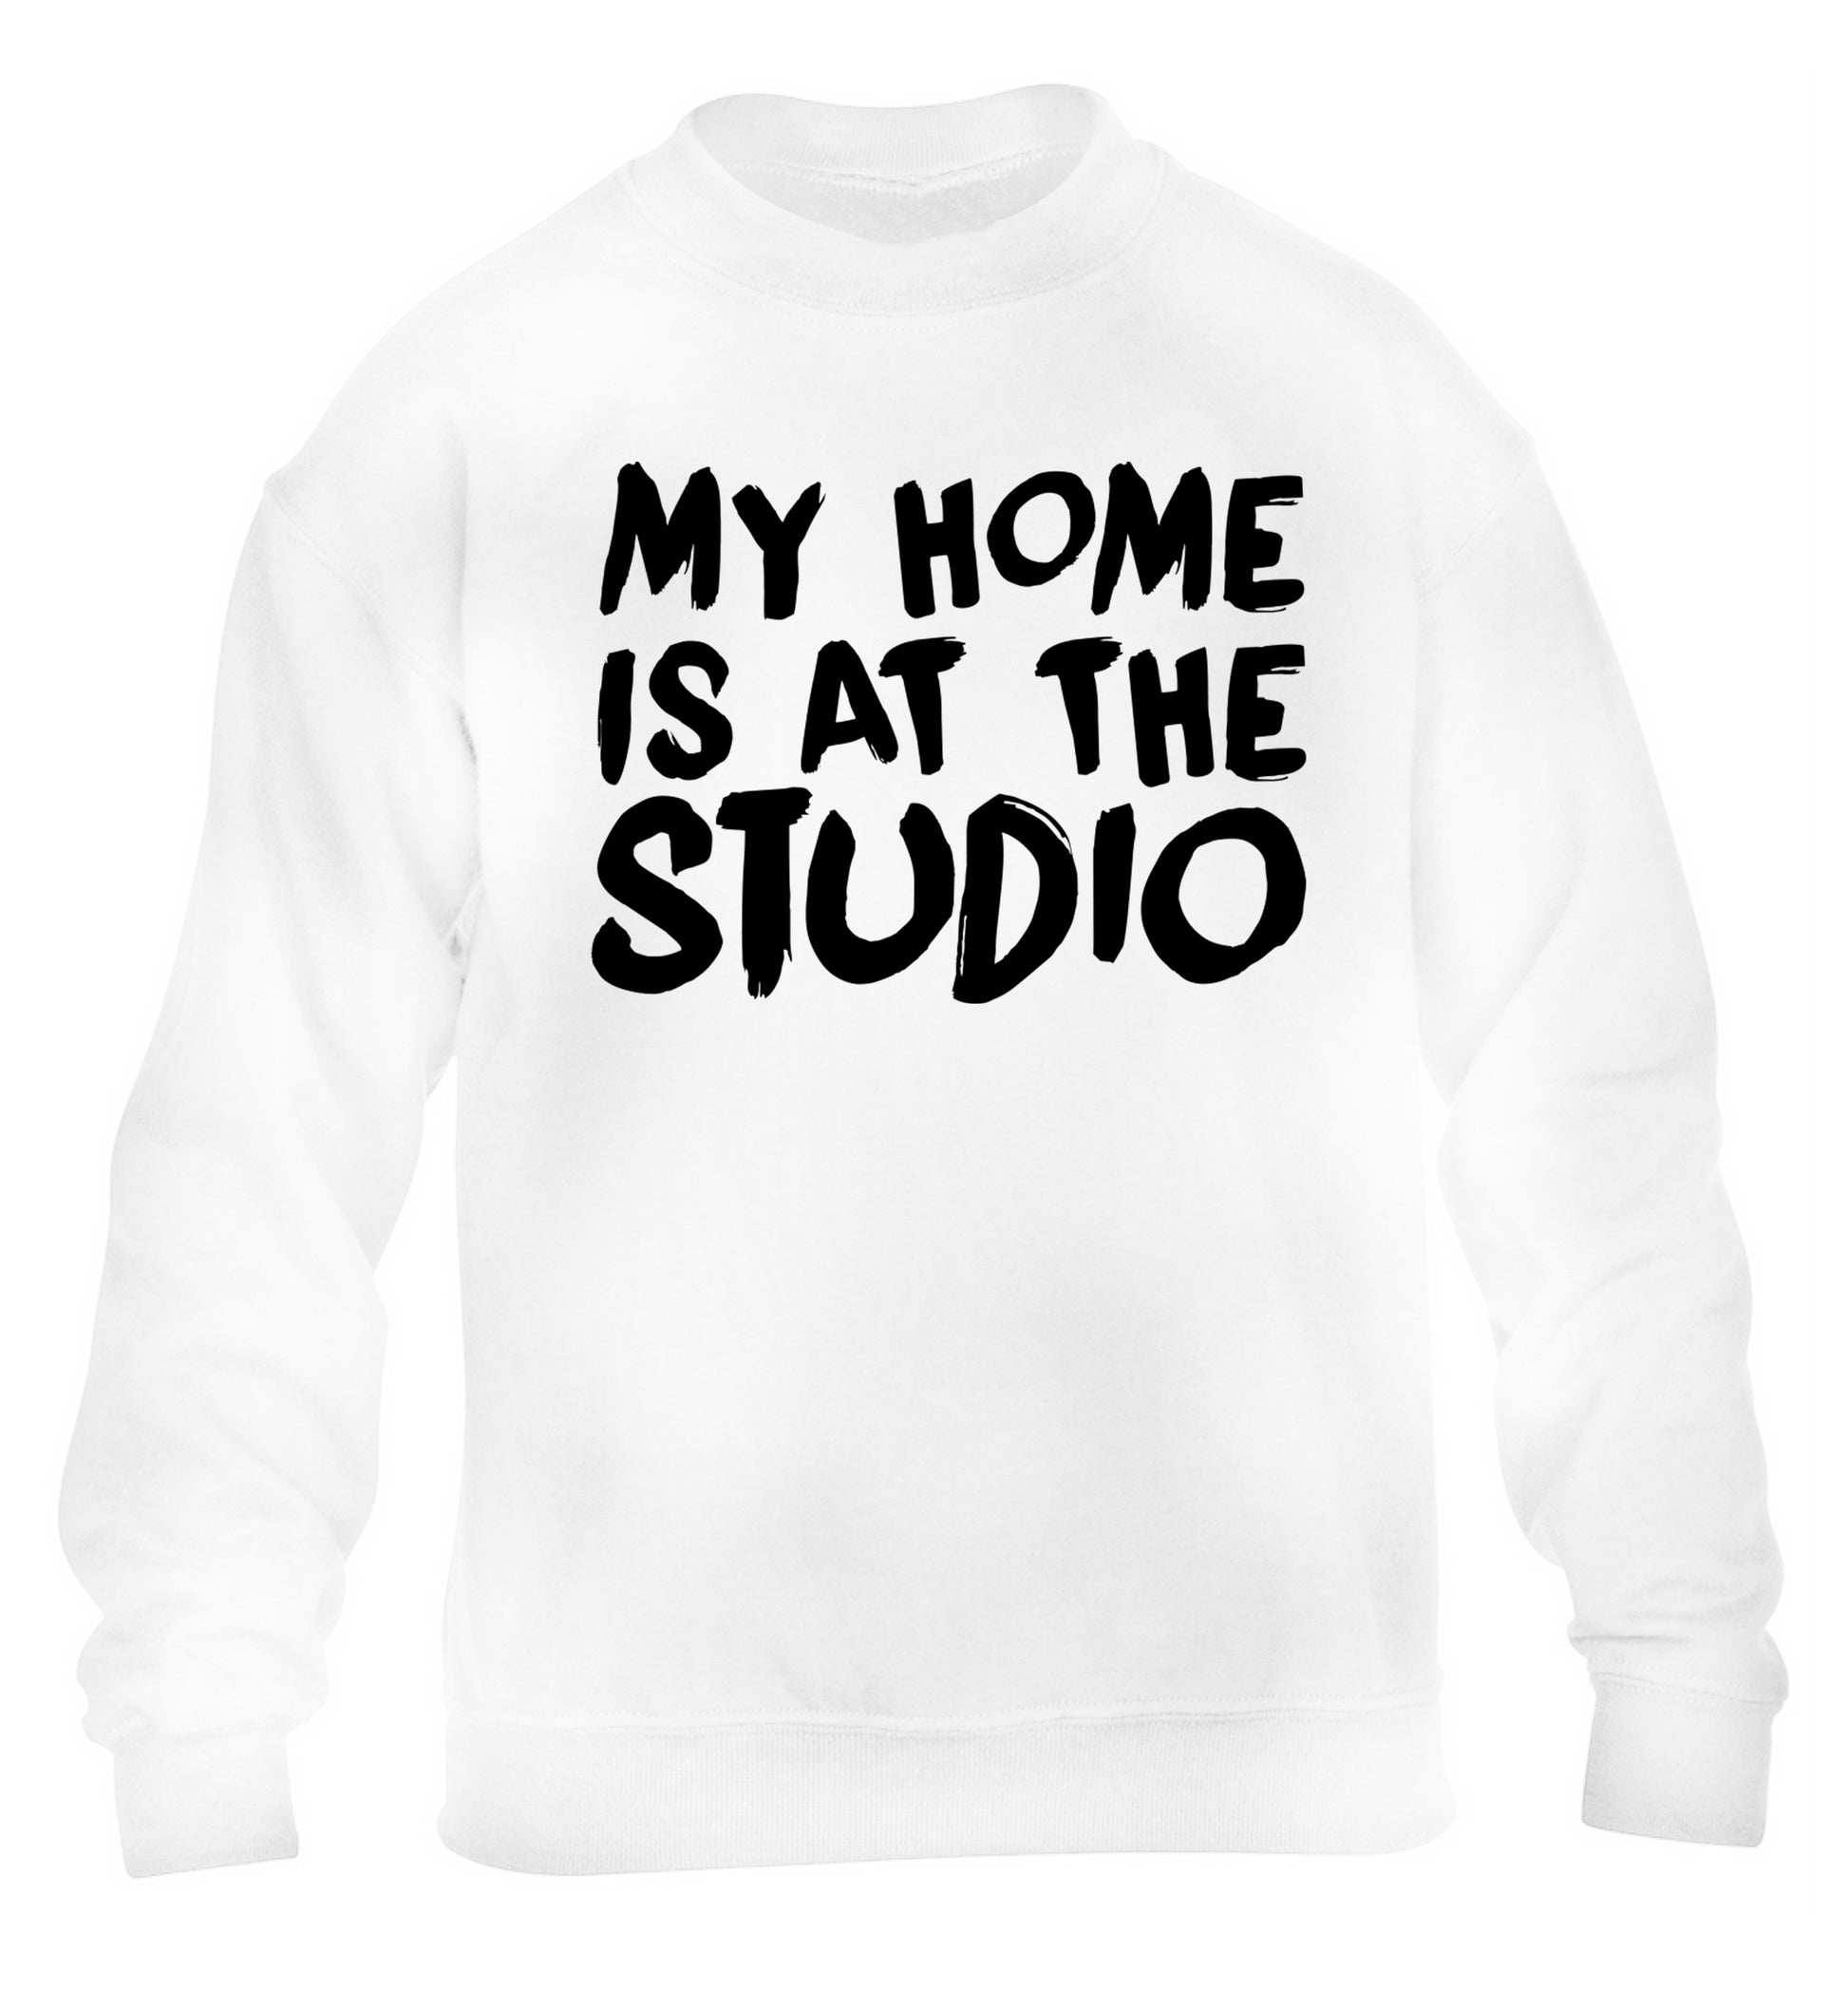 My home is at the studio children's white sweater 12-14 Years